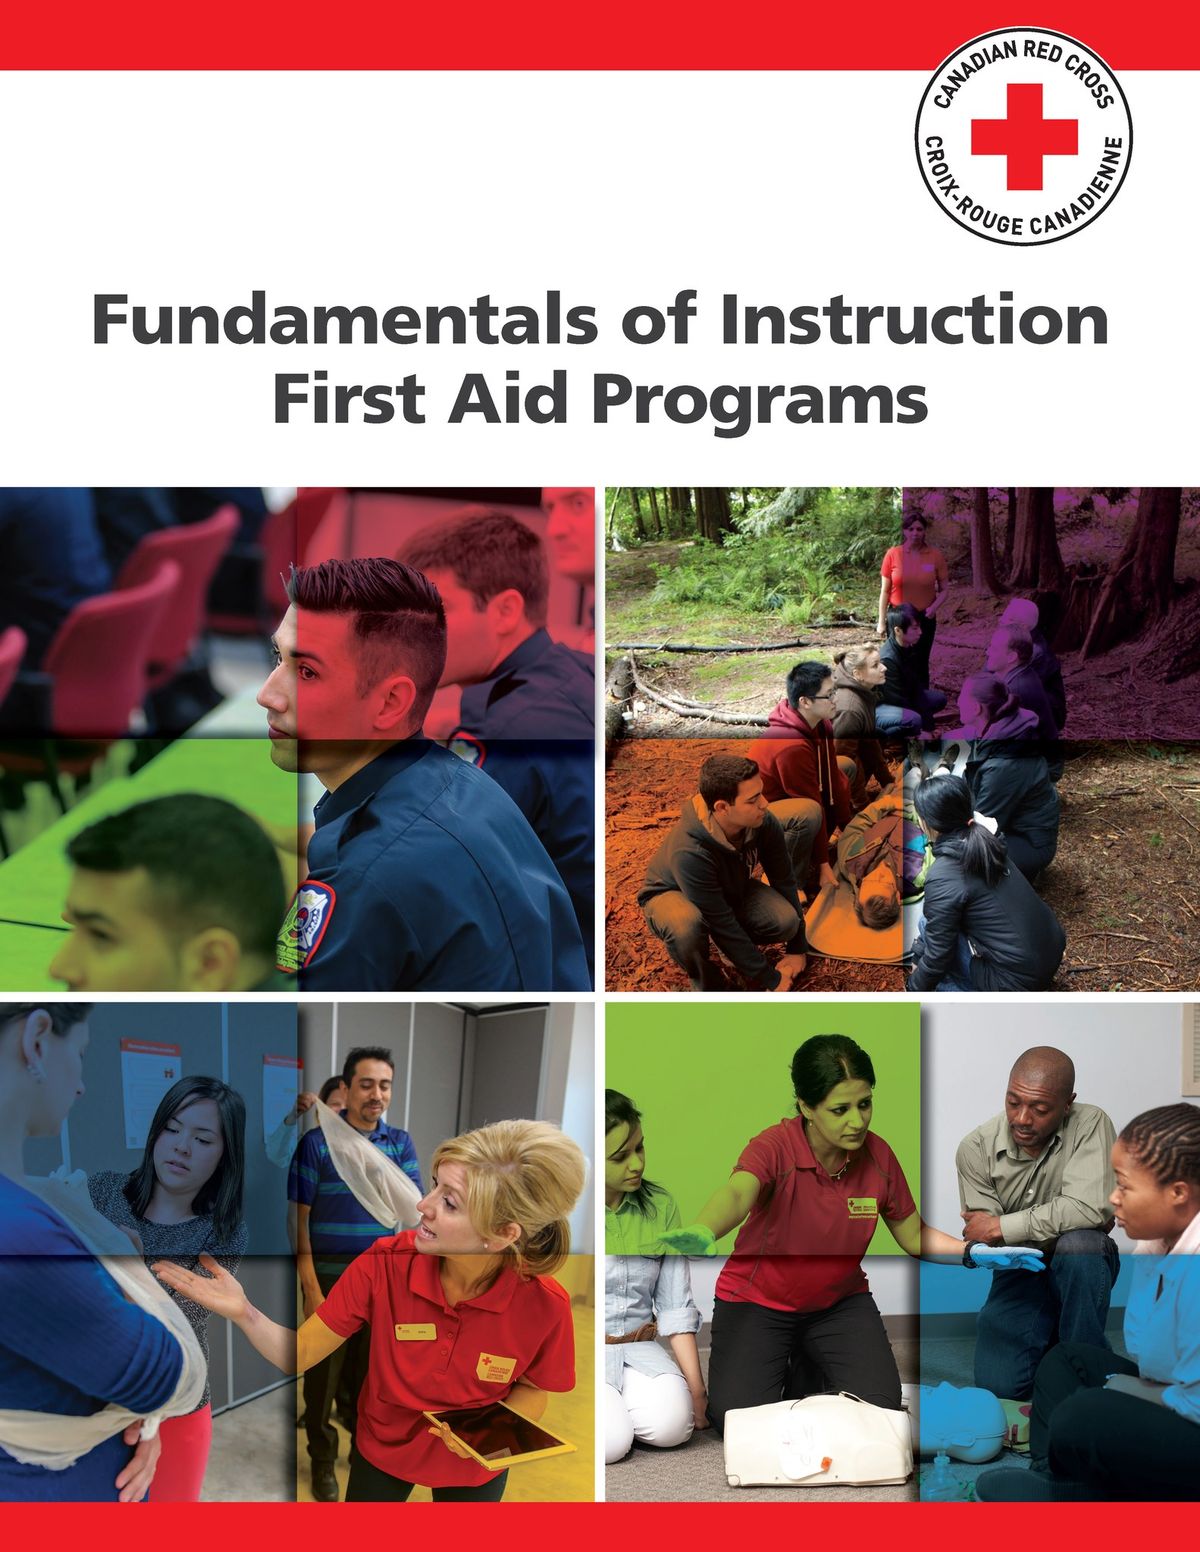 First Aid Instructor Course Part 1 Fundamental of Instruction